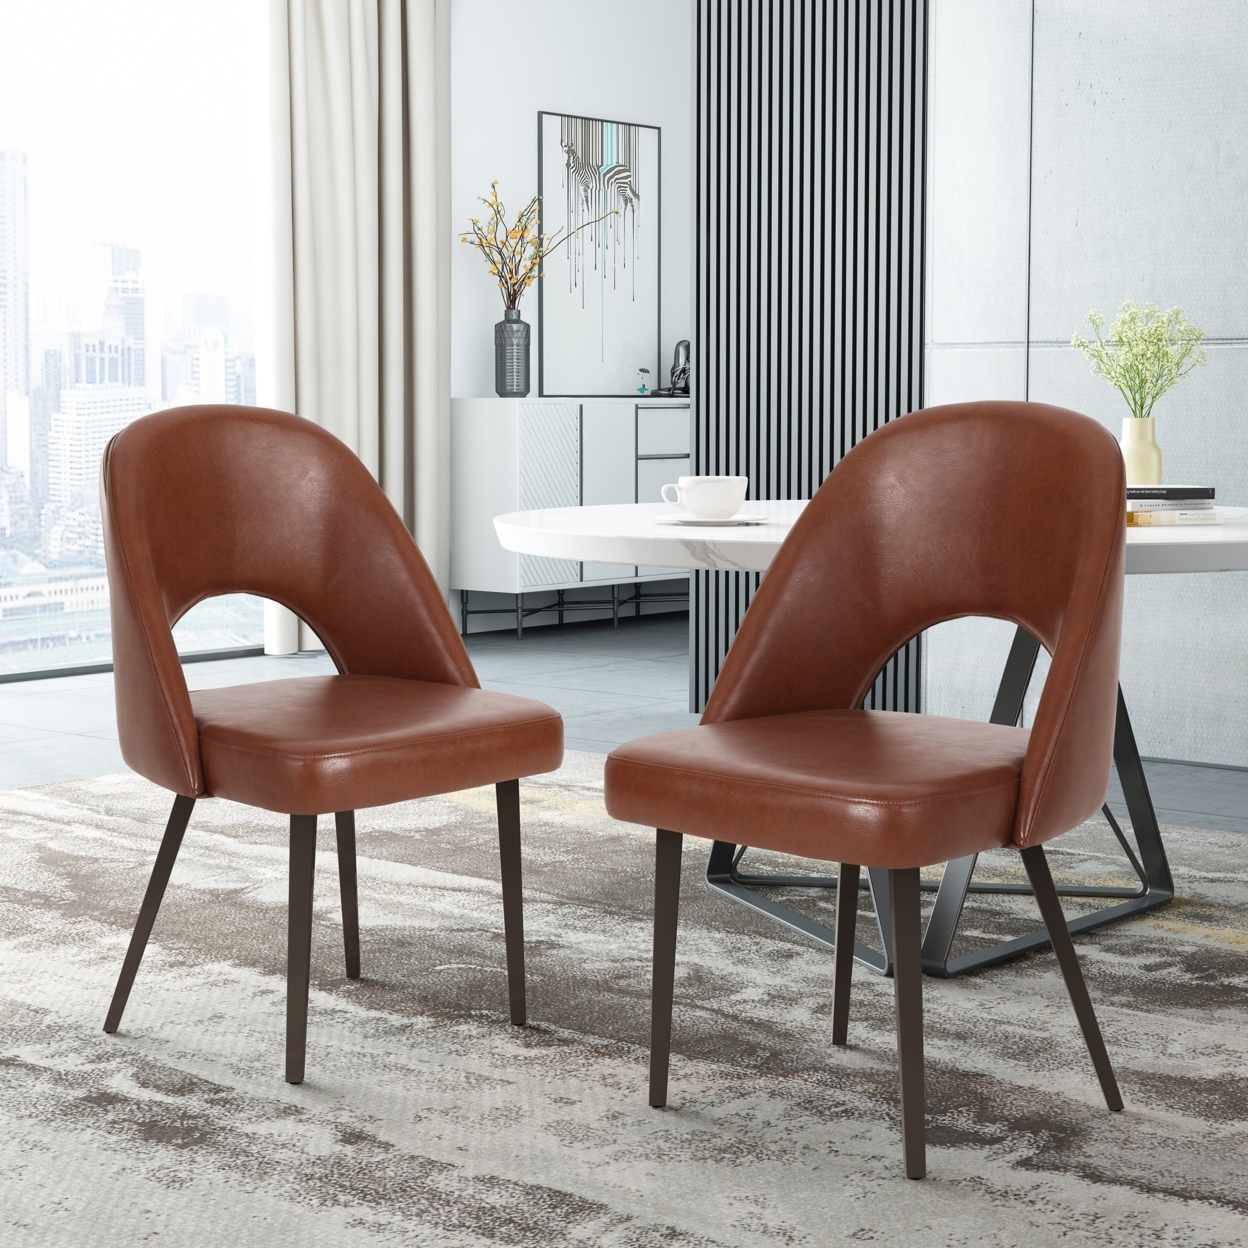 Odum Abbeville Contemporary Open Back Dining Chairs, Set Of 2 - Dark Brown/gun Metal